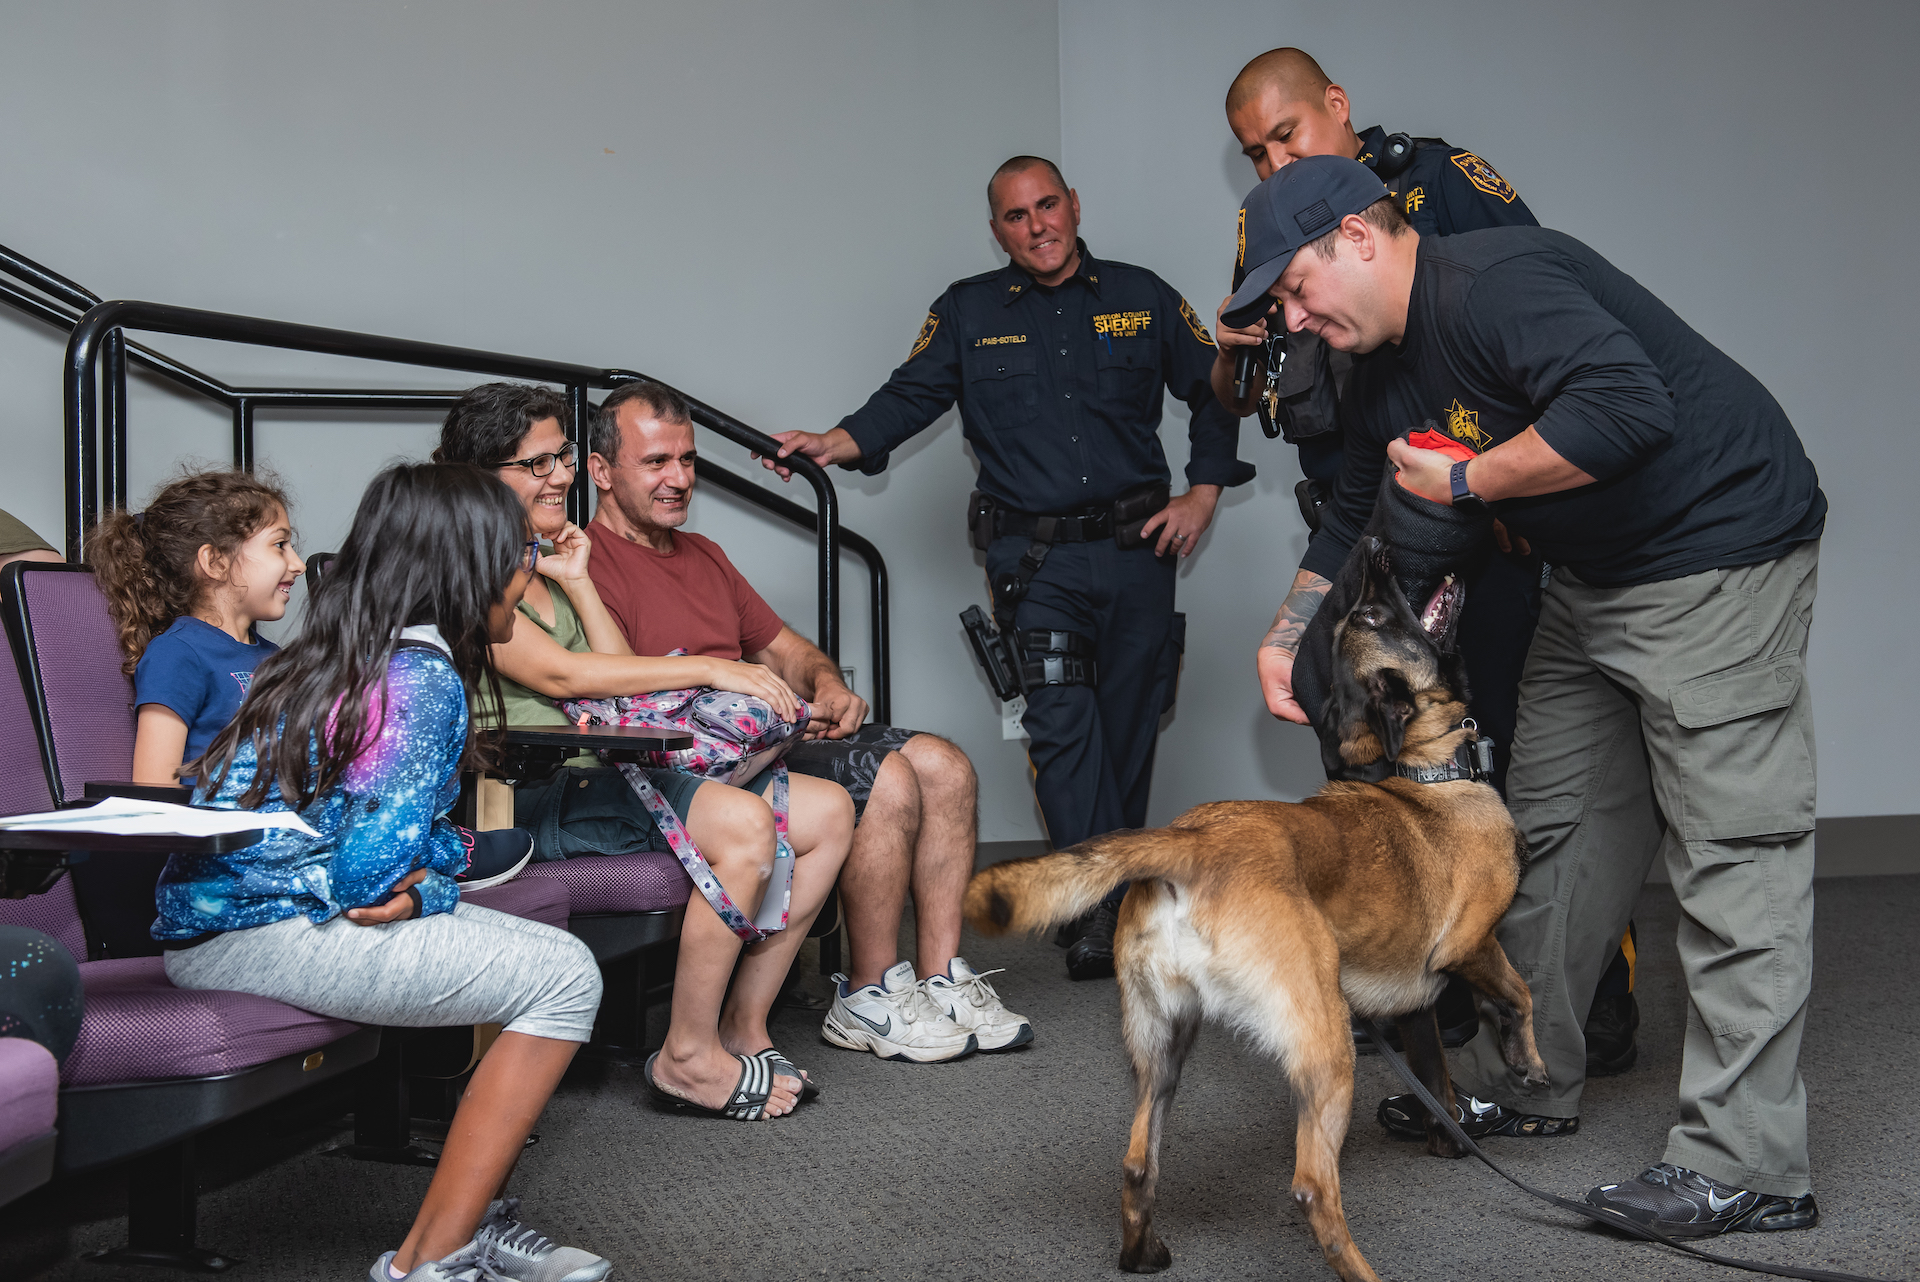 Family meeting dog who is part of Hudson County Sheriff's K9 Unit